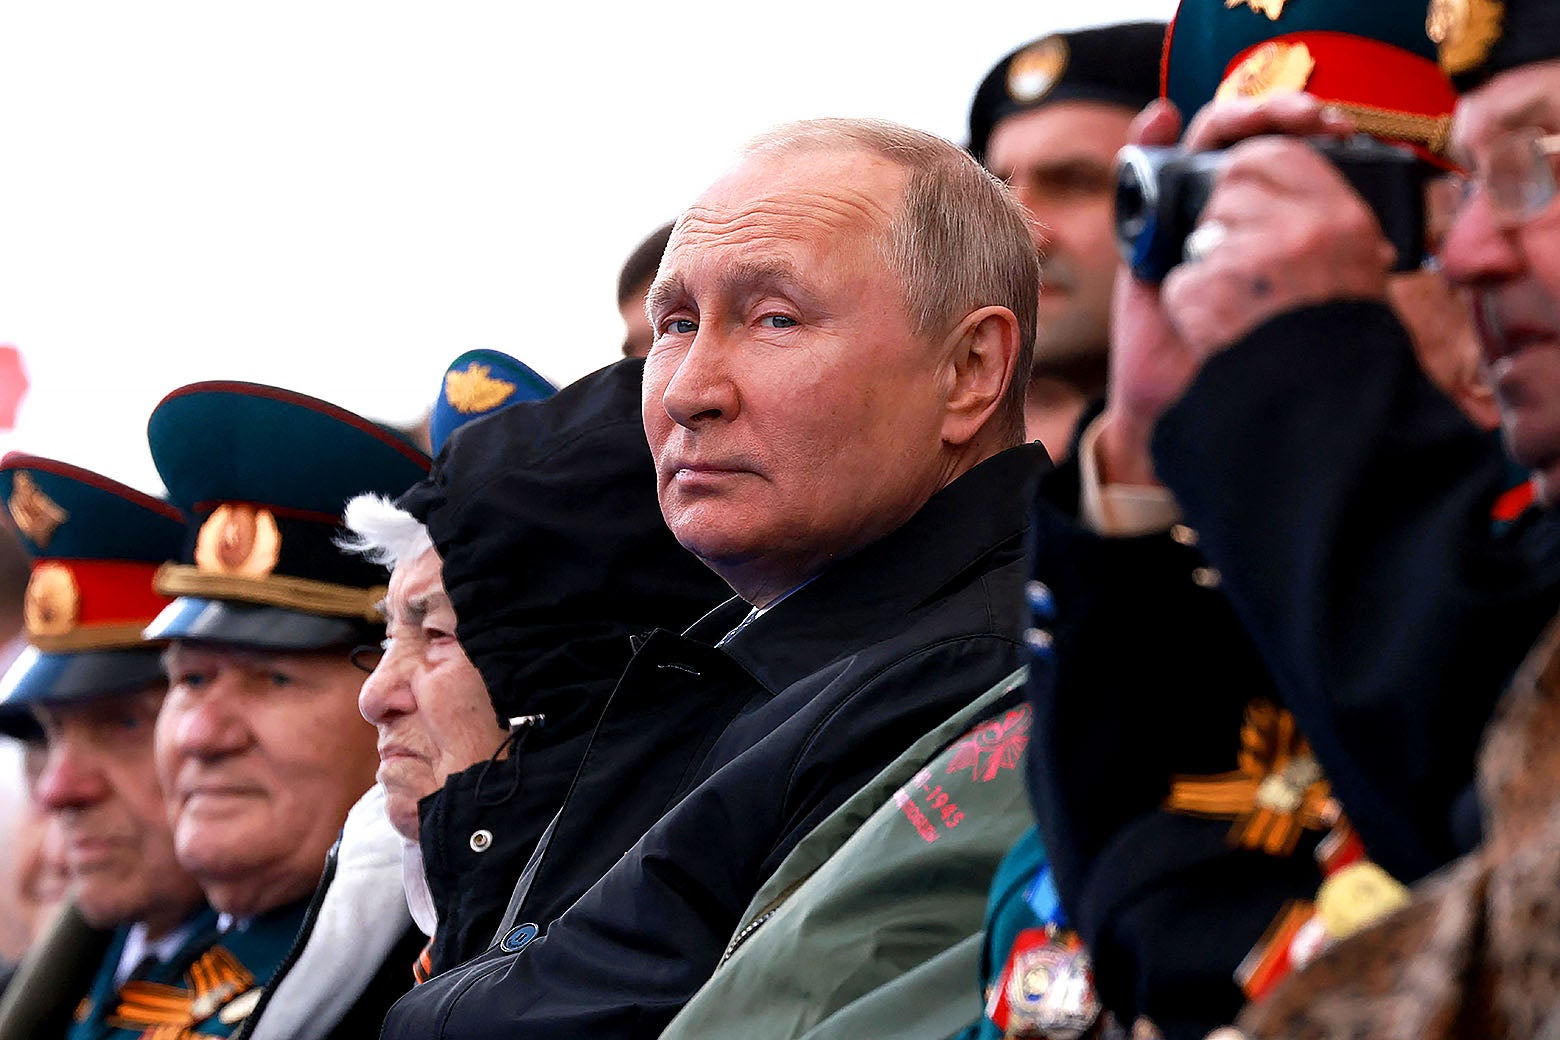 Putin in a dark overcoat surrounded by men in ceremonial military dress outside.